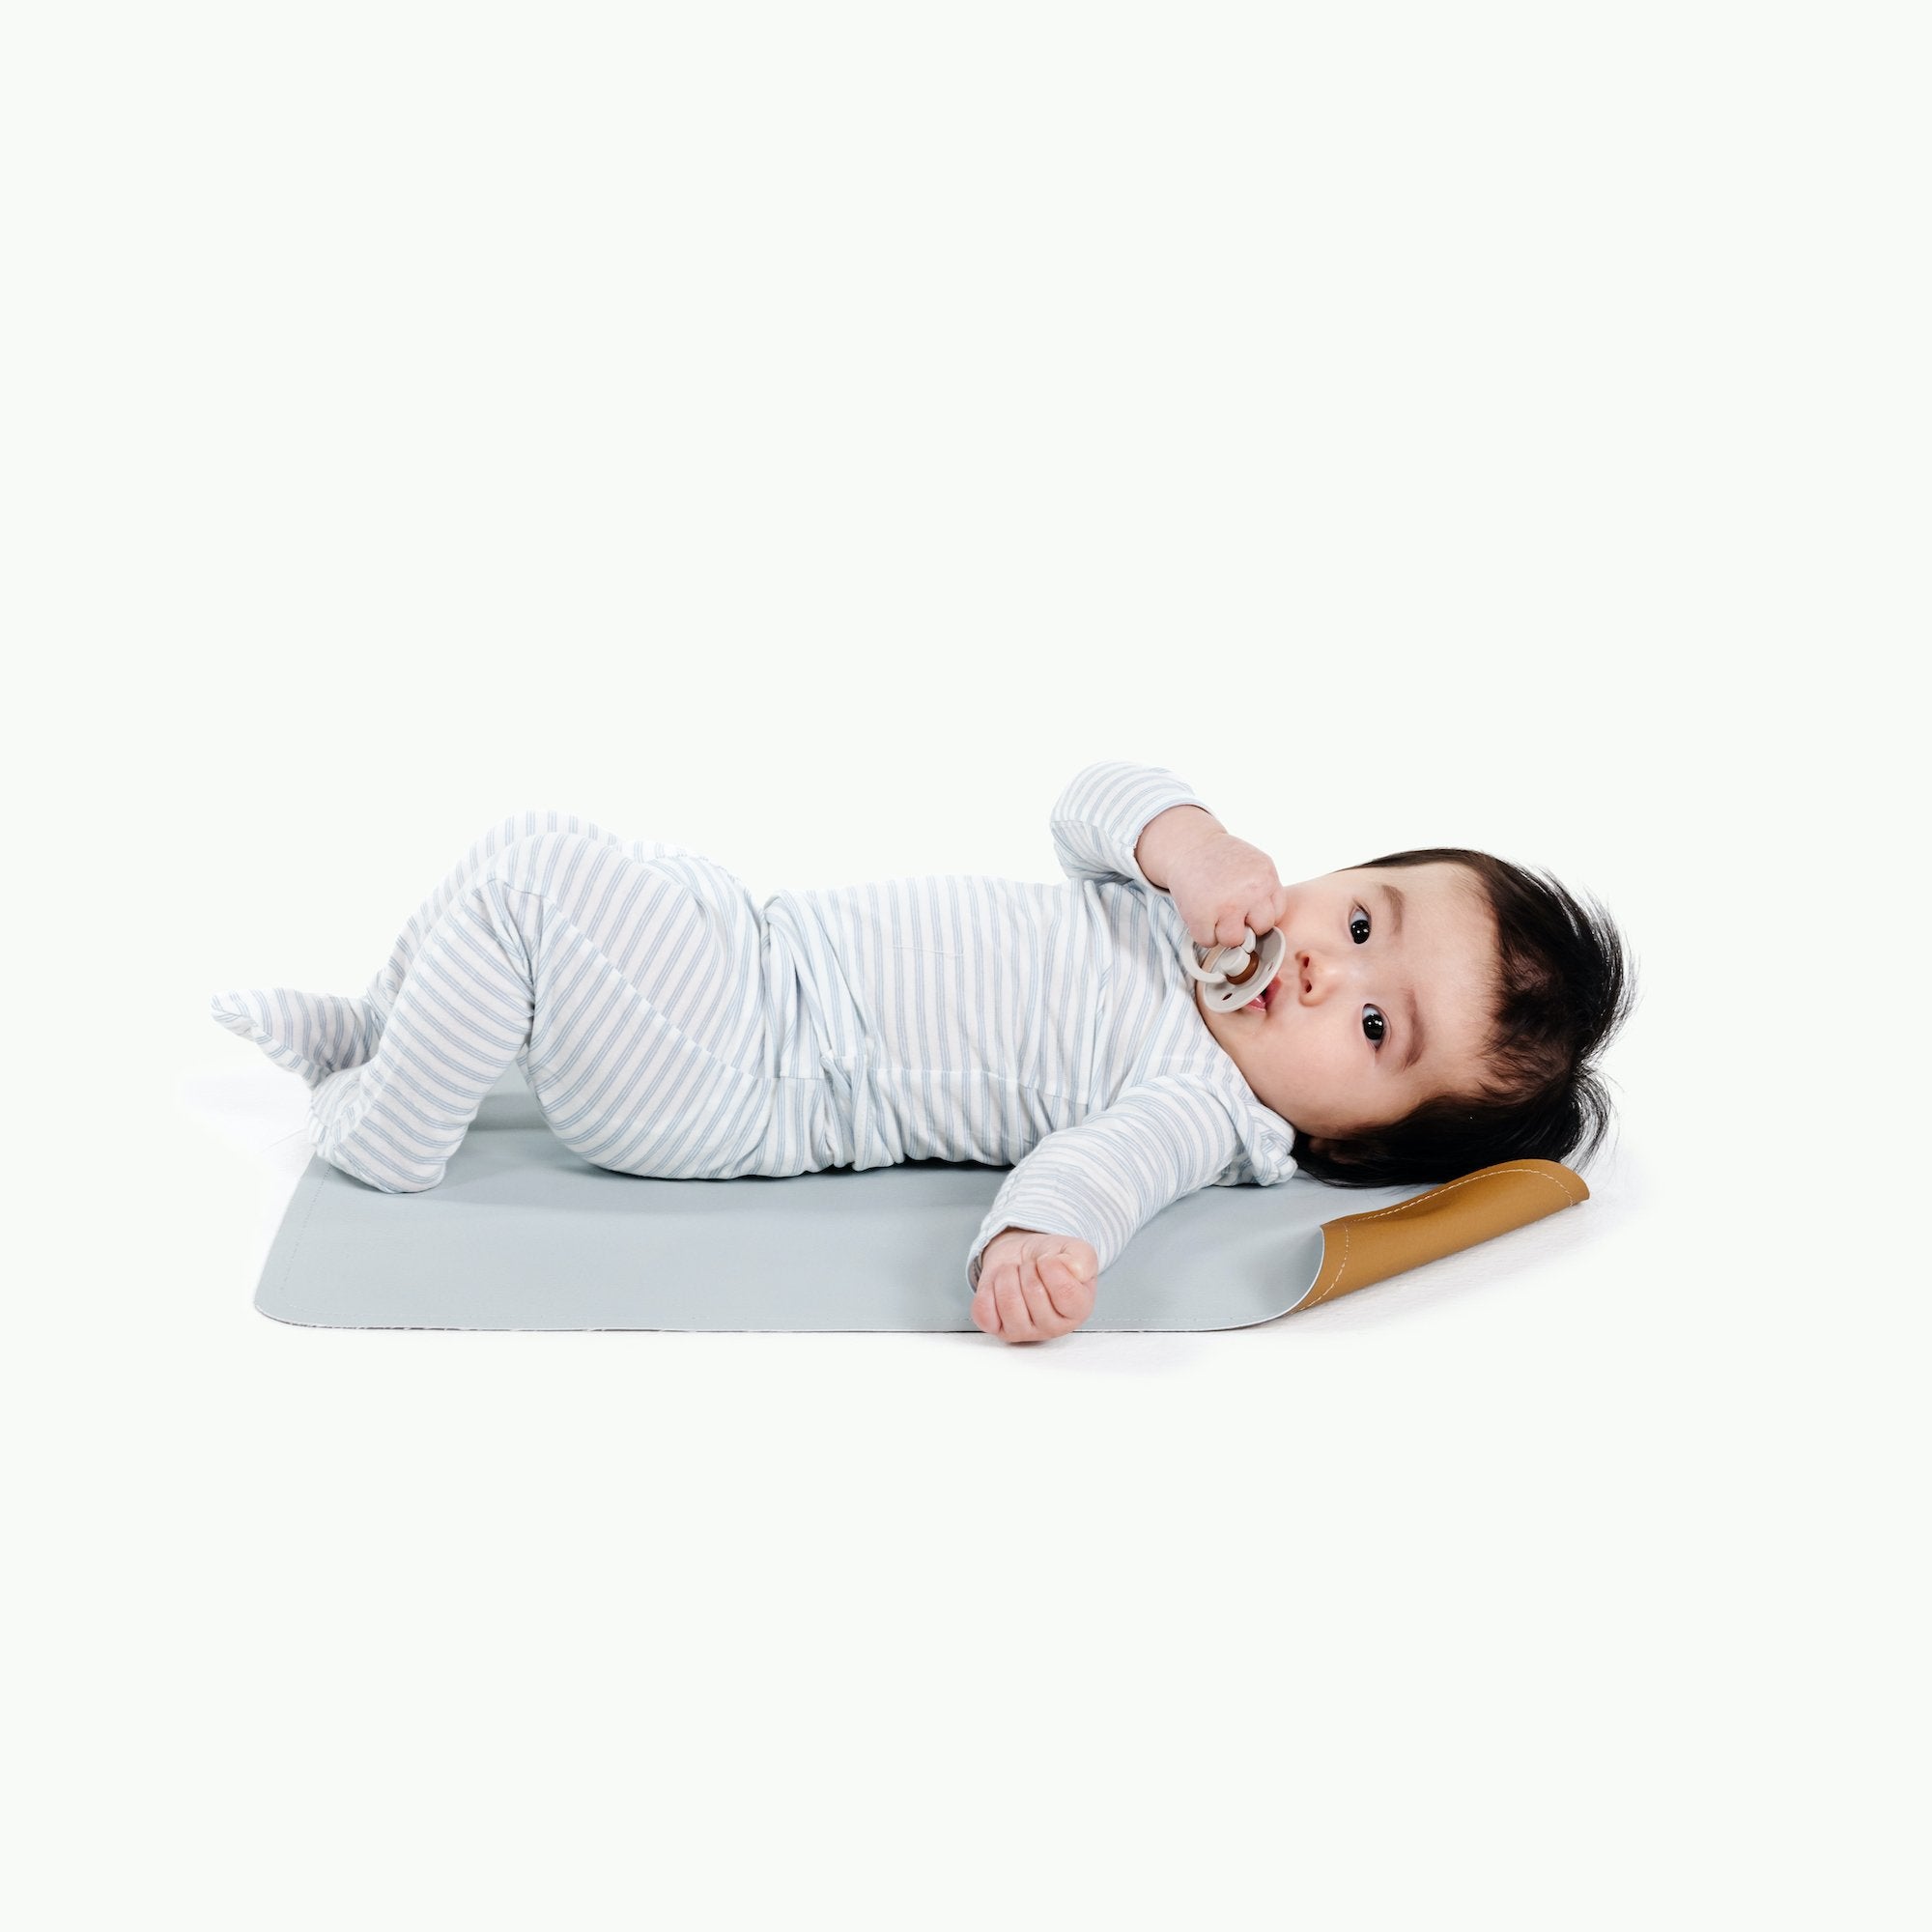 Dawn/Camel (on sale)@Baby on the Dawn/Camel Micro Mat